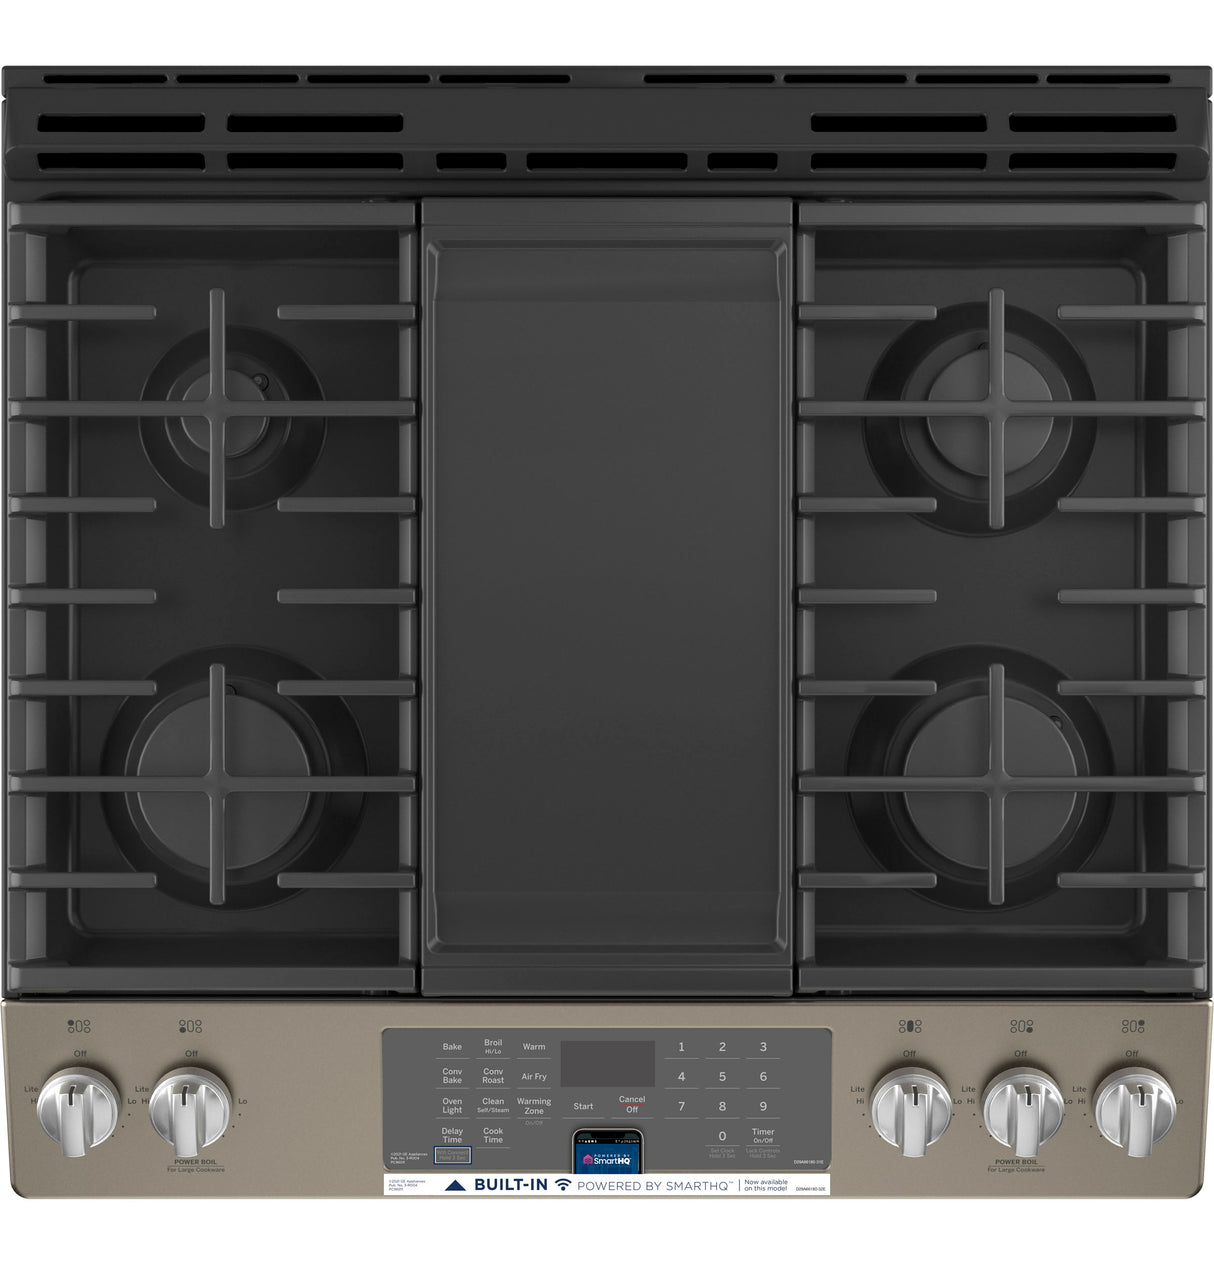 GE(R) 30" Slide-In Front-Control Convection Gas Range with No Preheat Air Fry - (JGS760EPES)